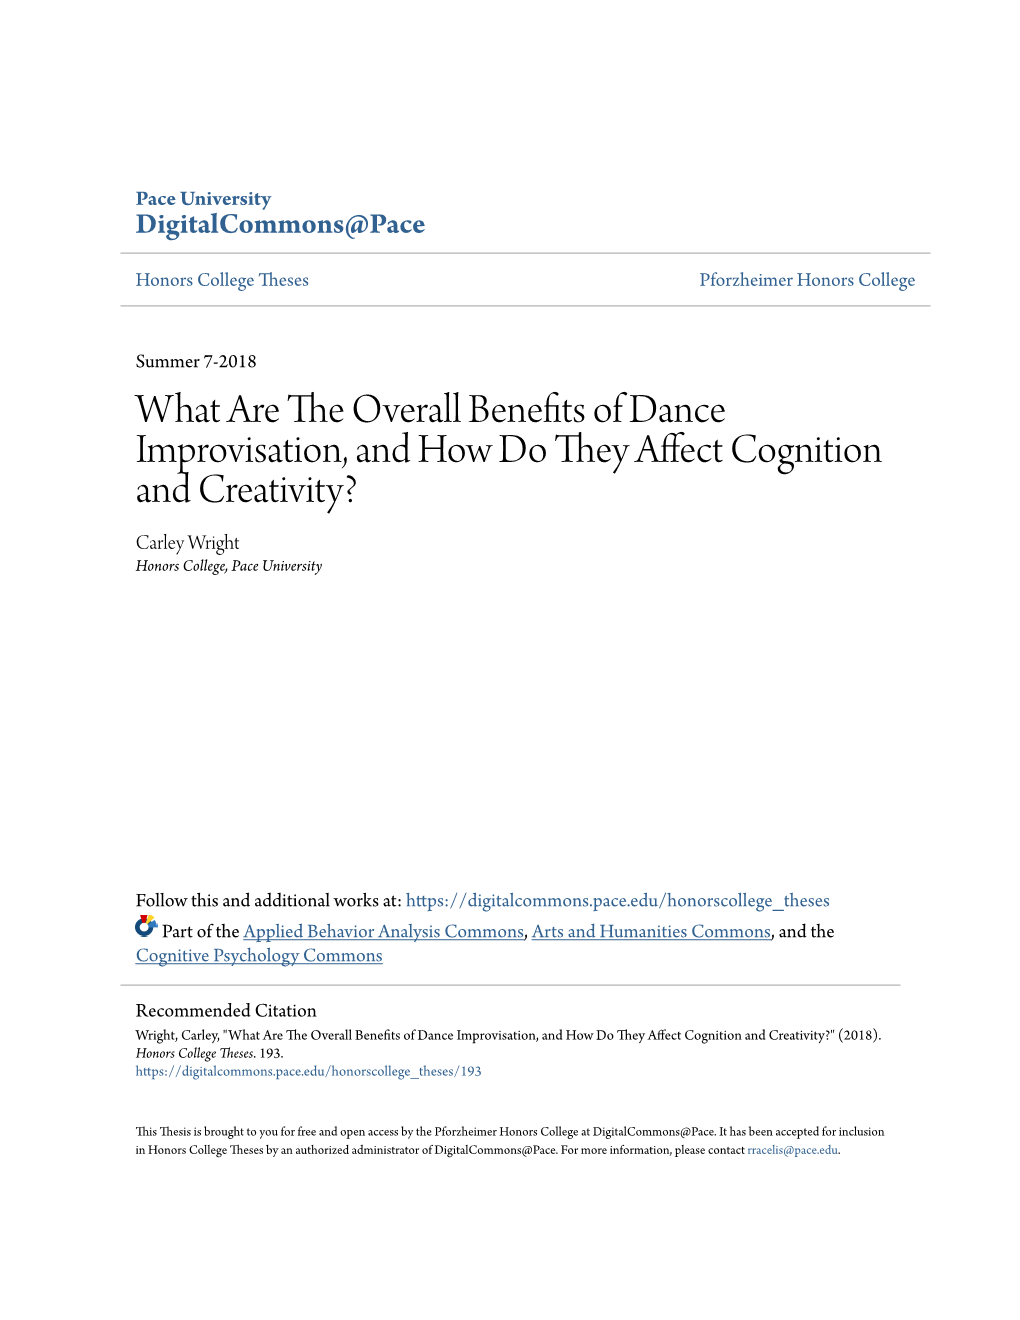 What Are the Overall Benefits of Dance Improvisation, and How Do They Affect Cognition and Creativity? Carley Wright Honors College, Pace University